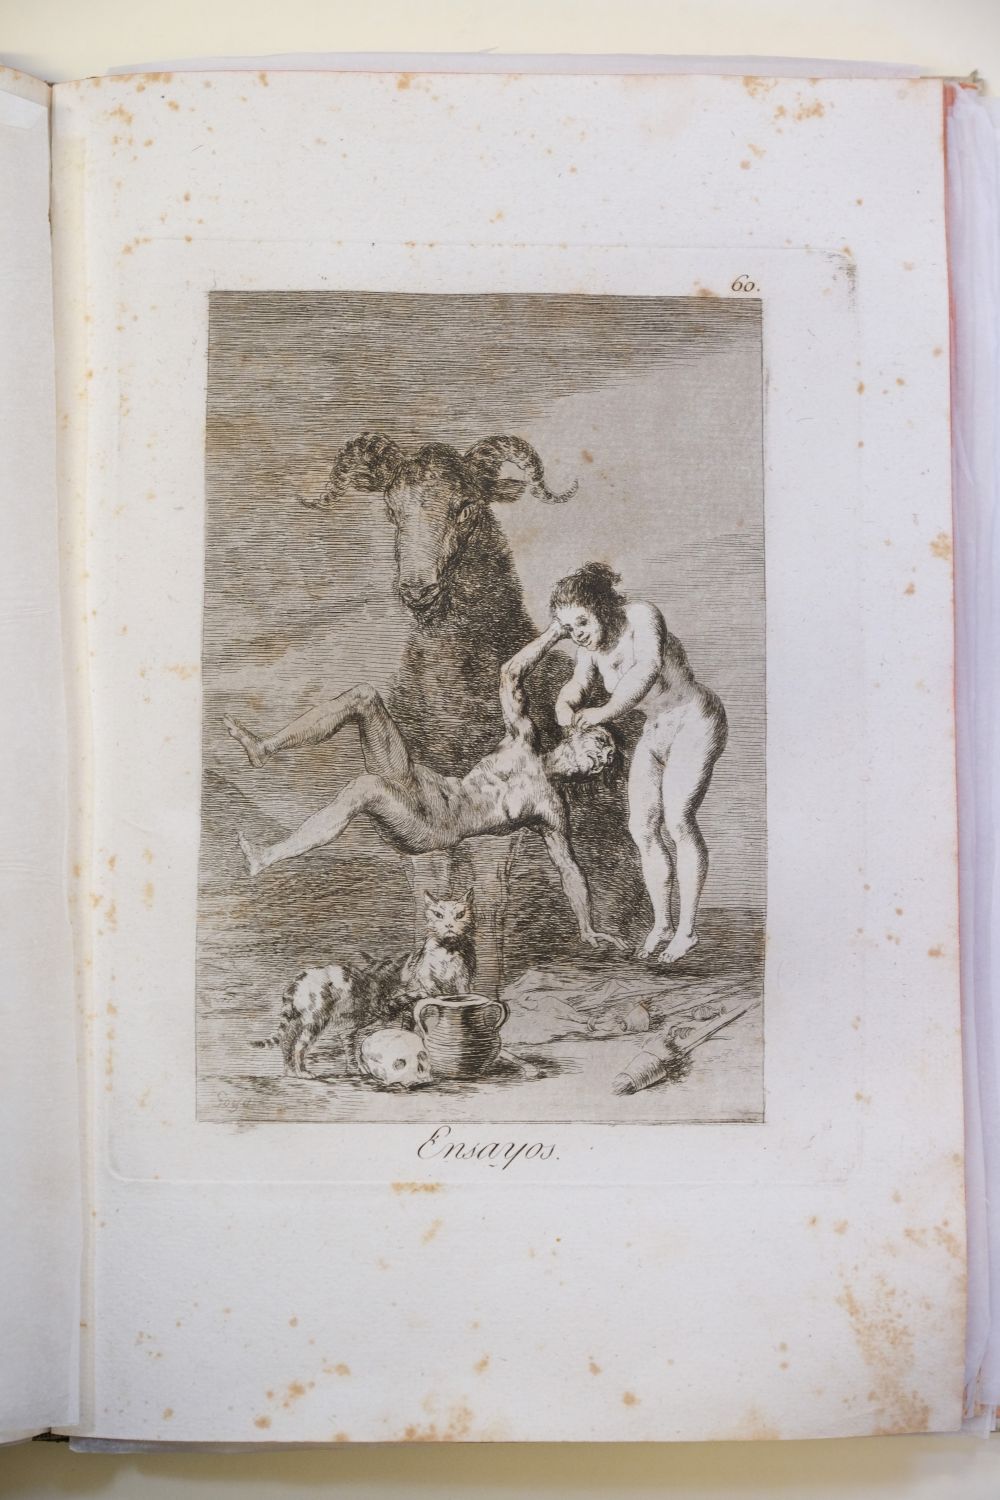 Goya (Francisco de, 1746-1828) Los Caprichos, 1799, the complete set of 80 etchings, FIRST EDITION - Image 33 of 37